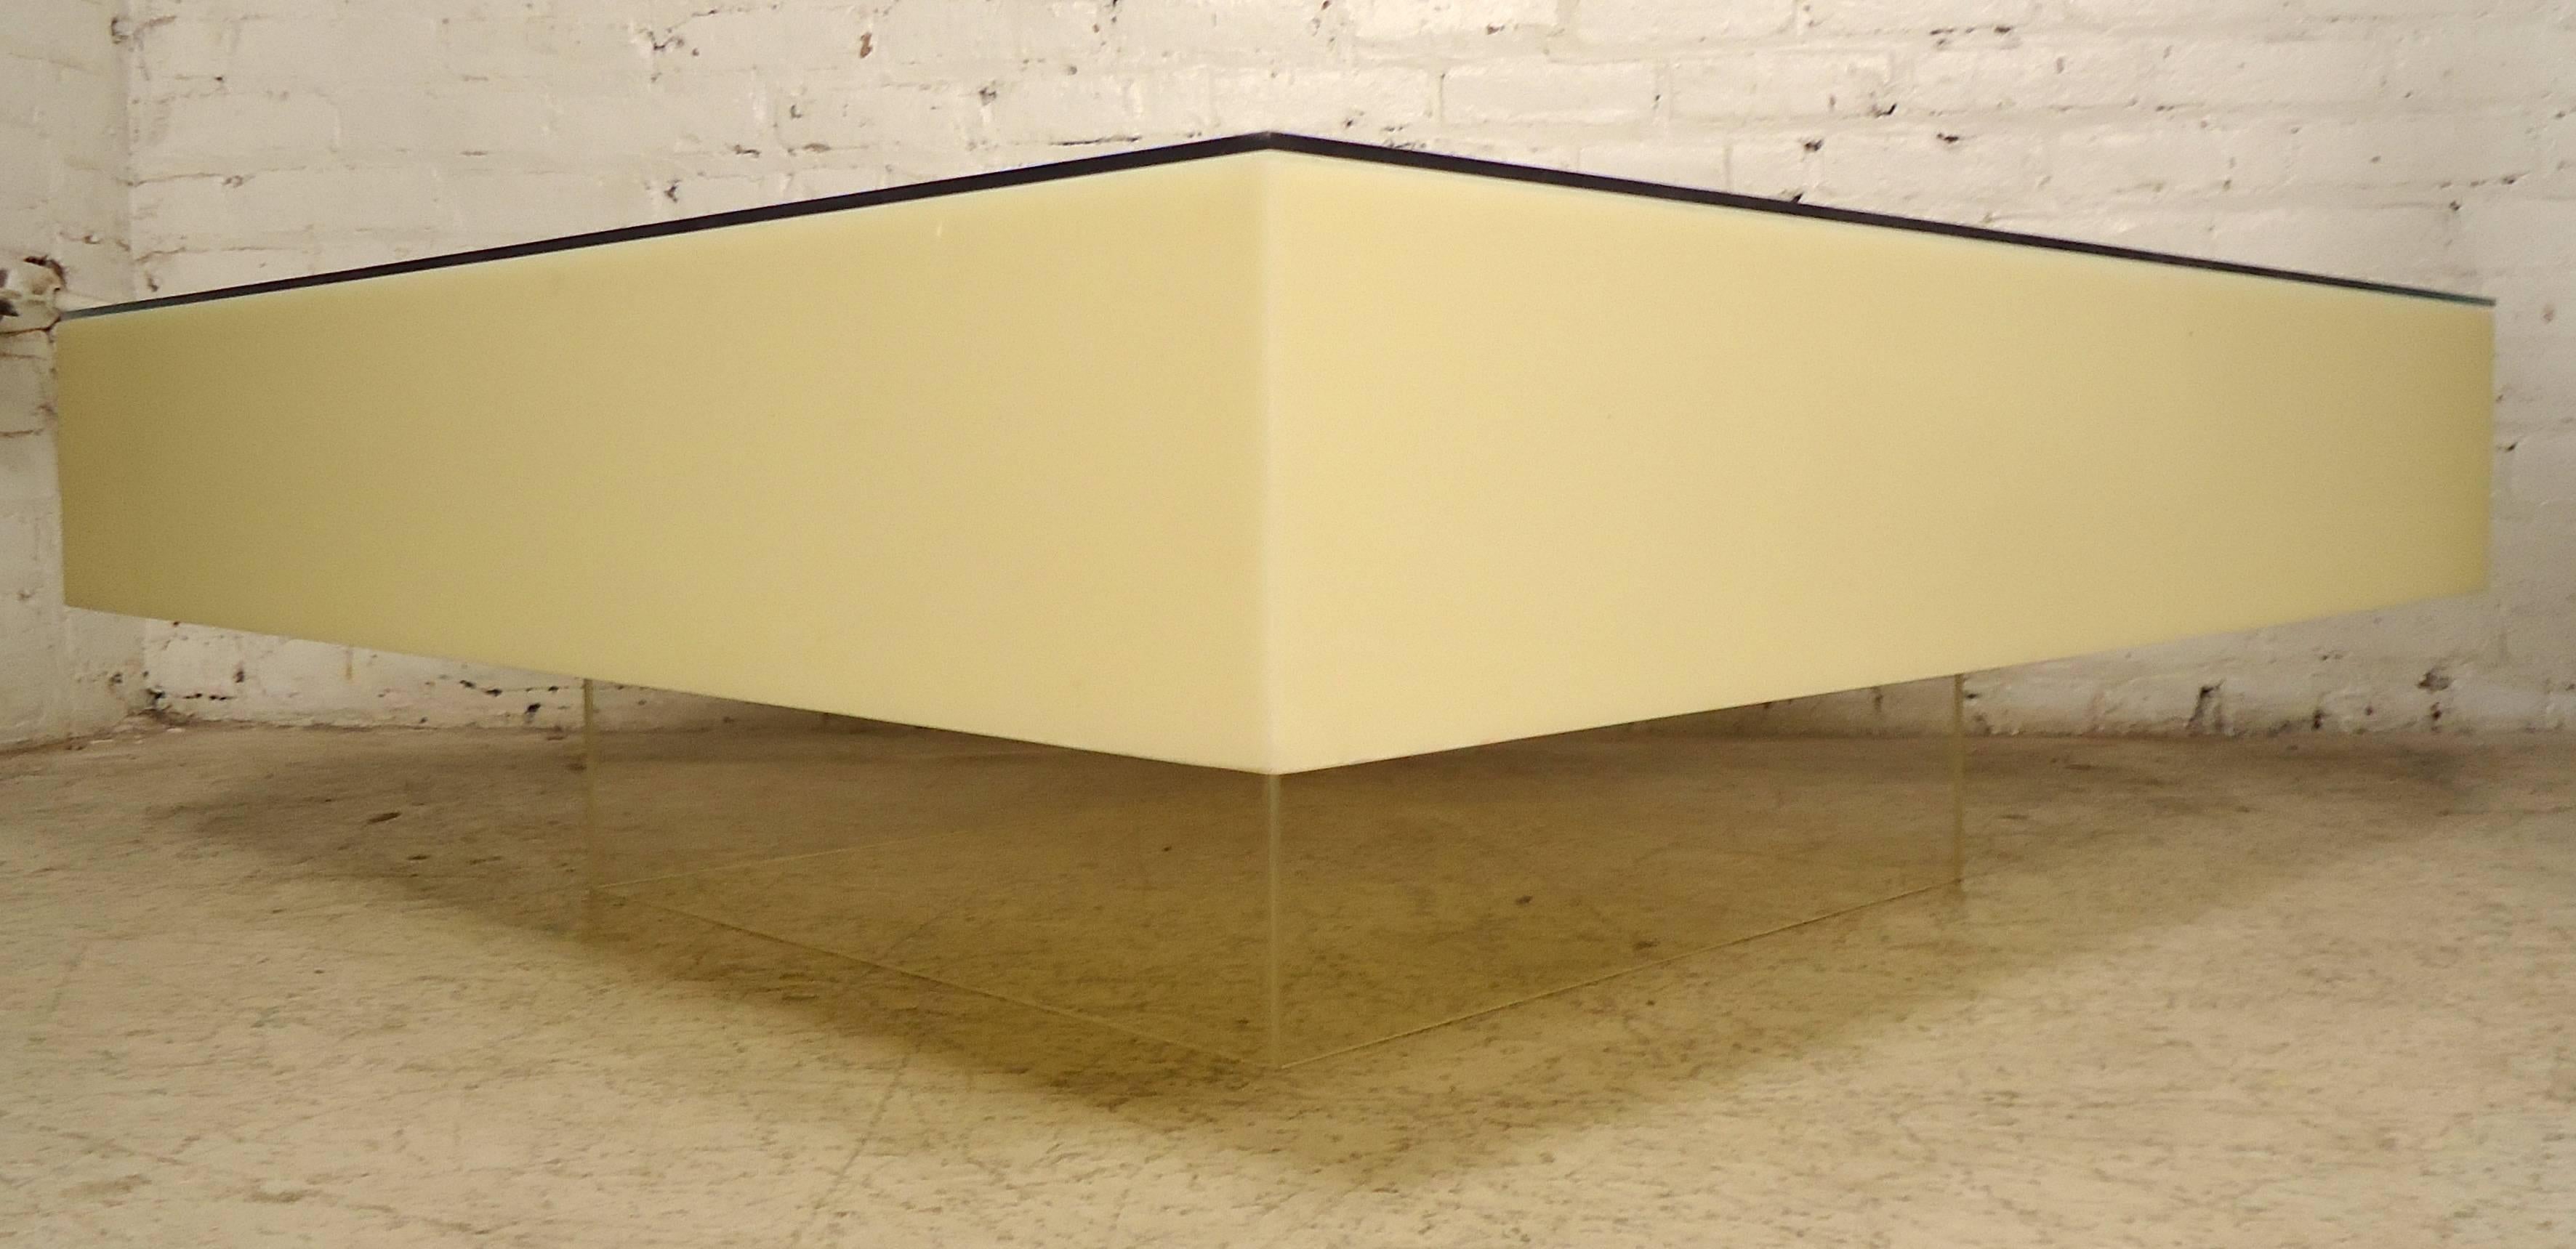 Impressive coffee table made of thick opaque Lucite and glass top. Clear Lucite base. Very unique style. Lights can be set underneath for an illuminated effect.

(Please confirm item location - NY or NJ - with dealer).
 